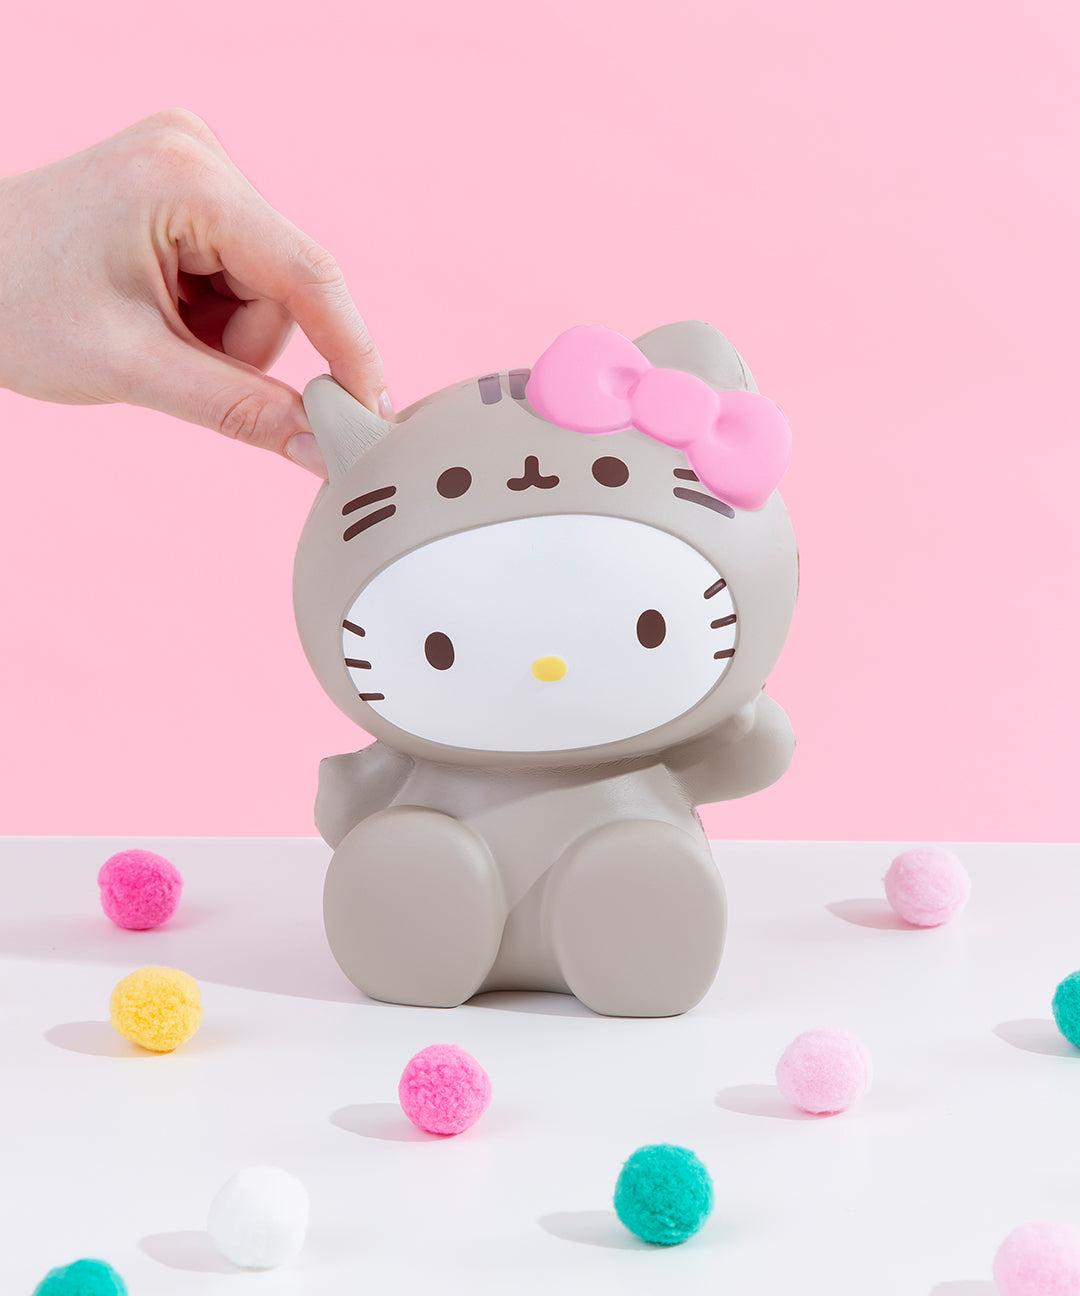 Hello Kitty Candy Plush Backpack